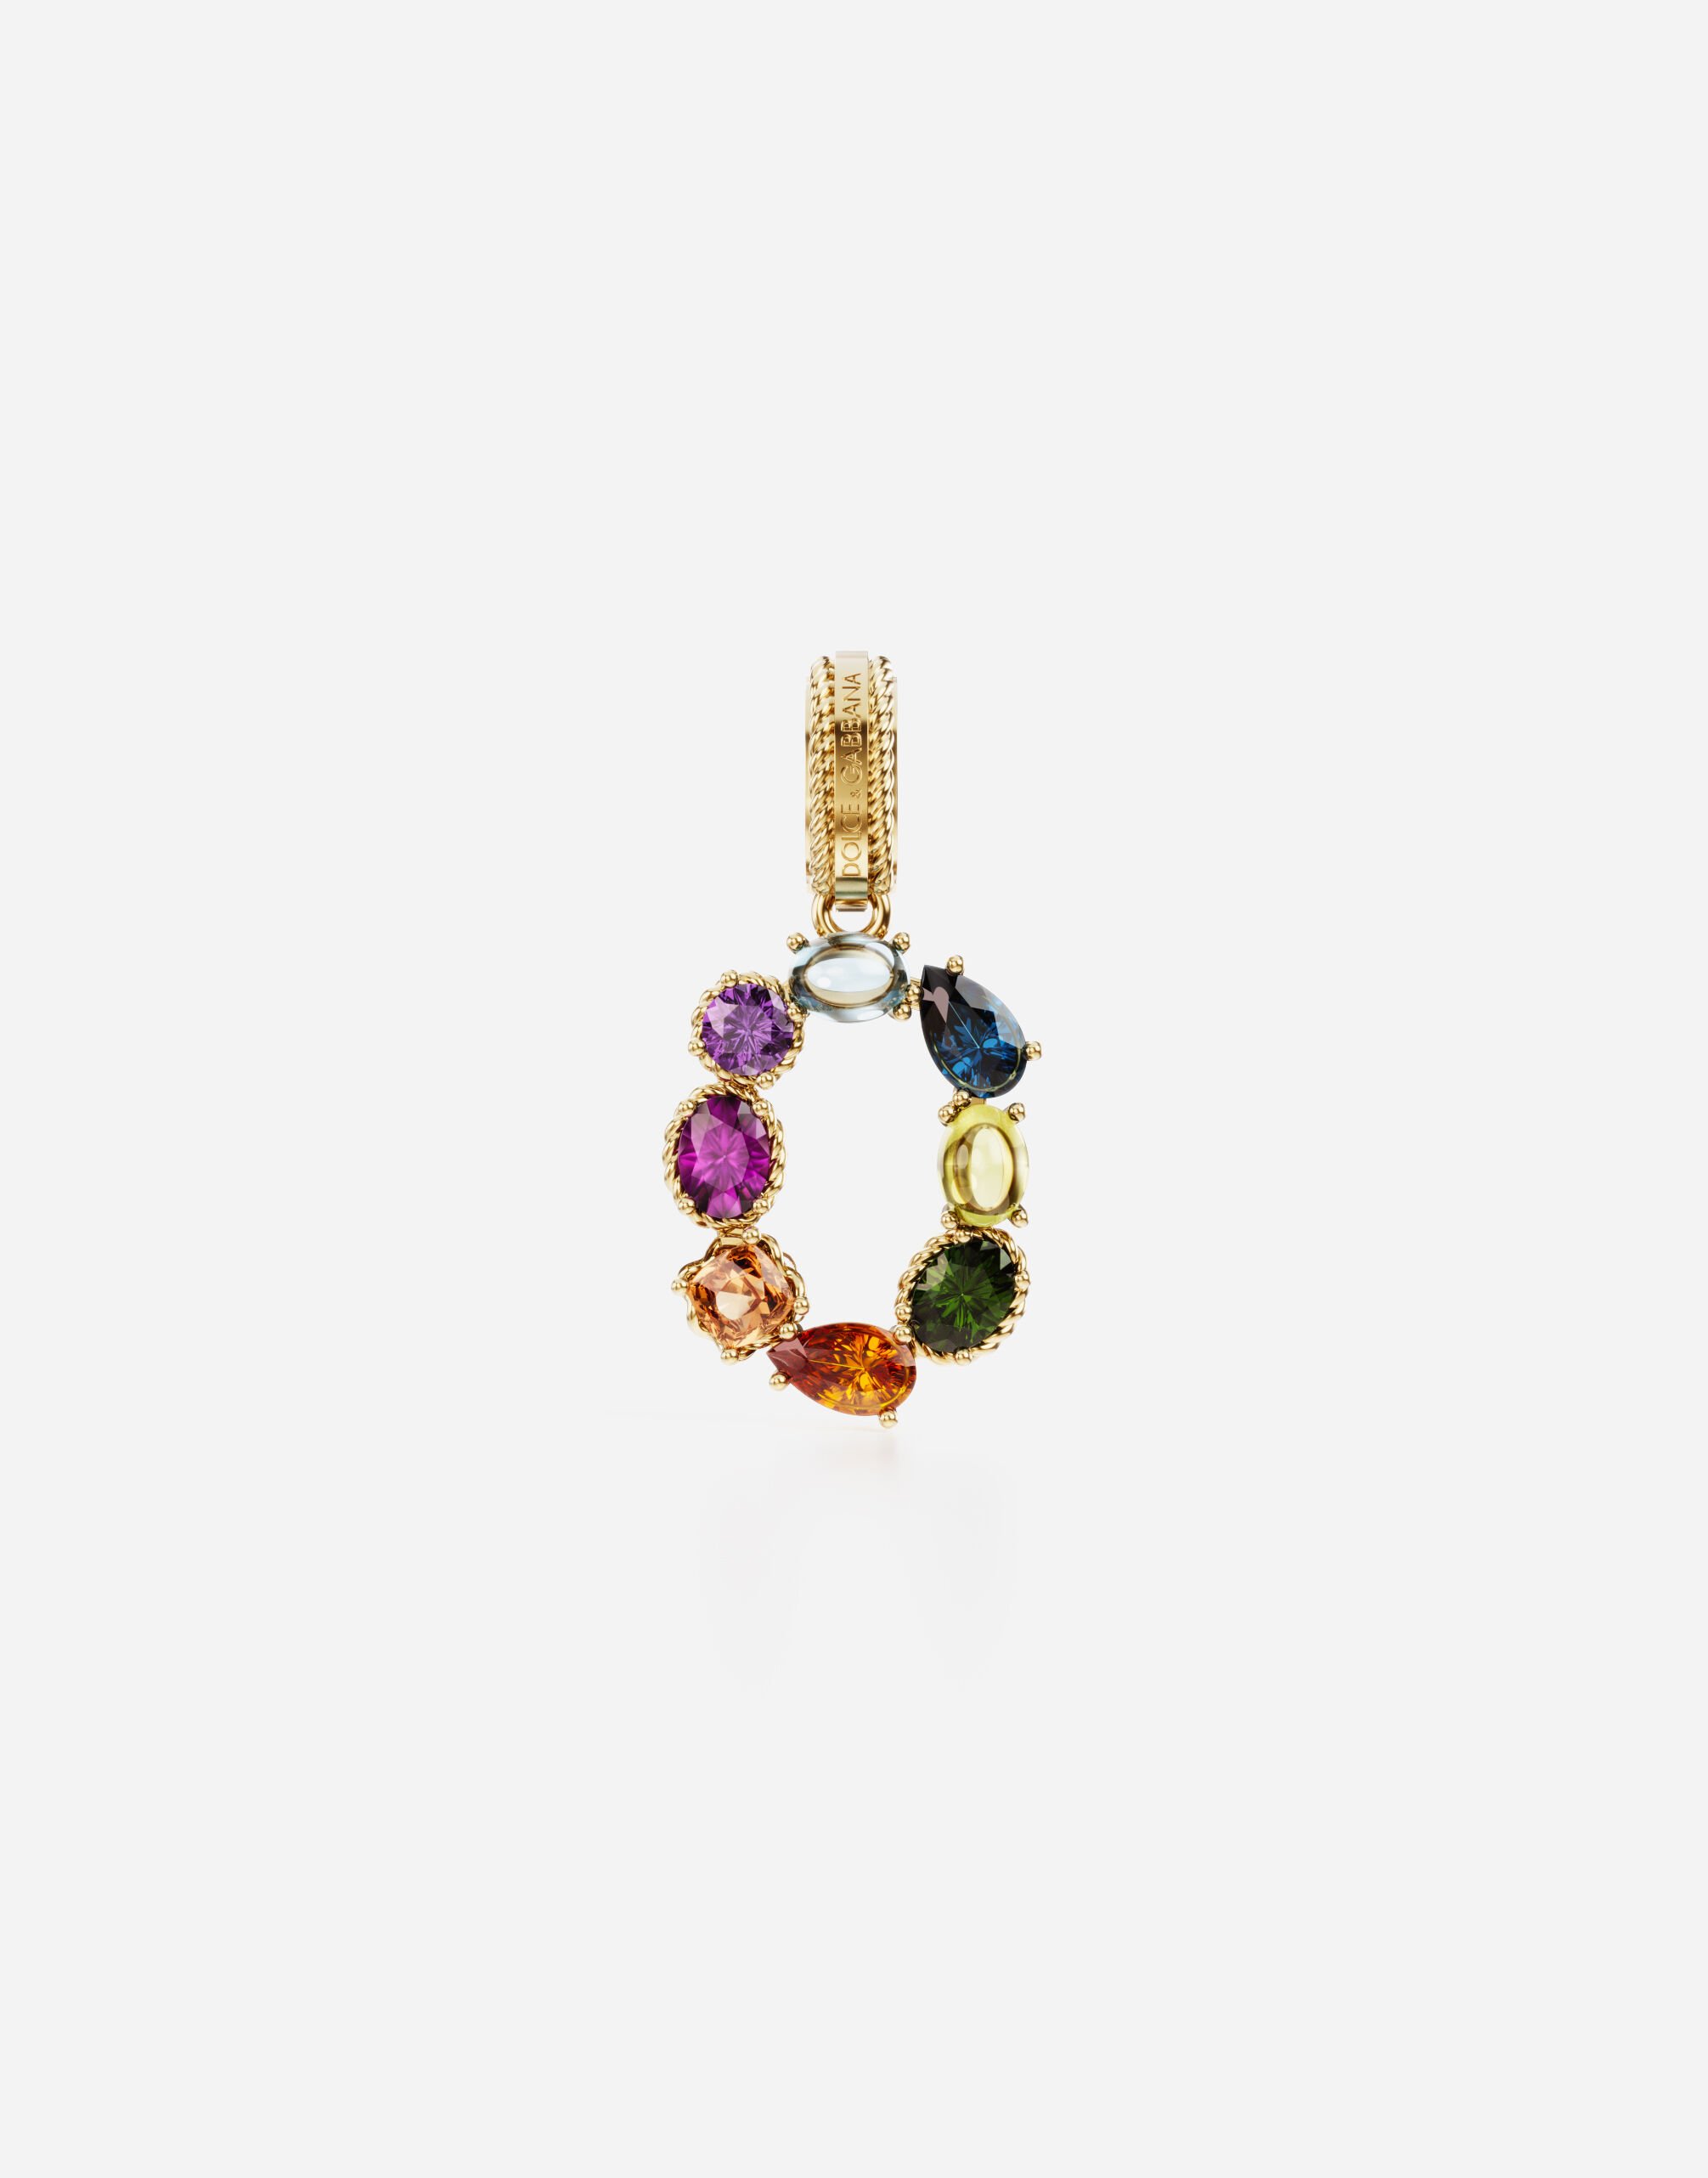 Dolce & Gabbana 18 kt yellow gold rainbow pendant  with multicolor finegemstones representing number 0 Yellow gold WAPR1GWMIX2